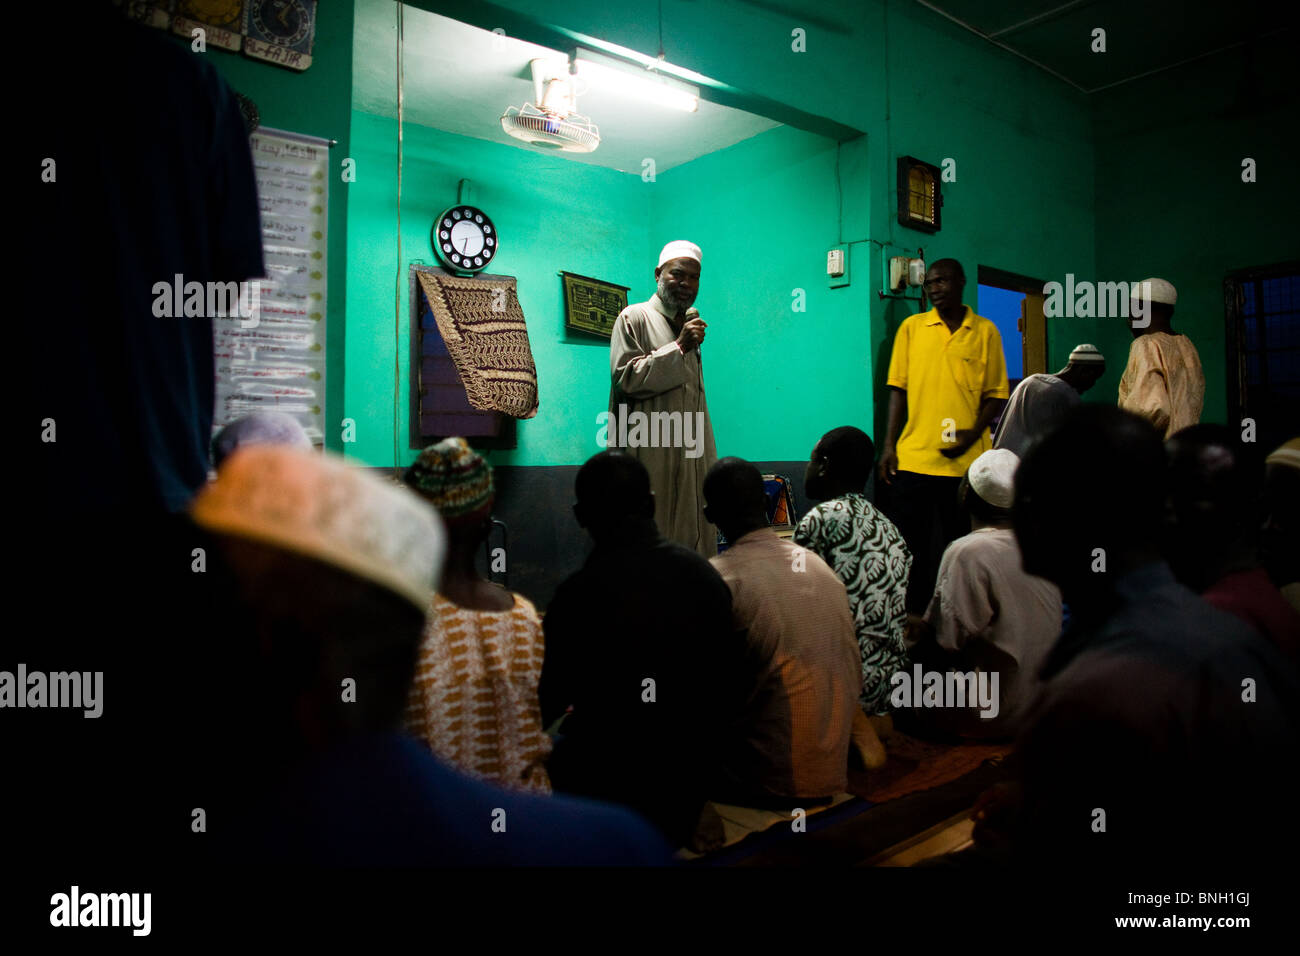 A local imam speaks to mosque attendees about an upcoming national polio immunization exercise after evening prayers at a mosque Stock Photo